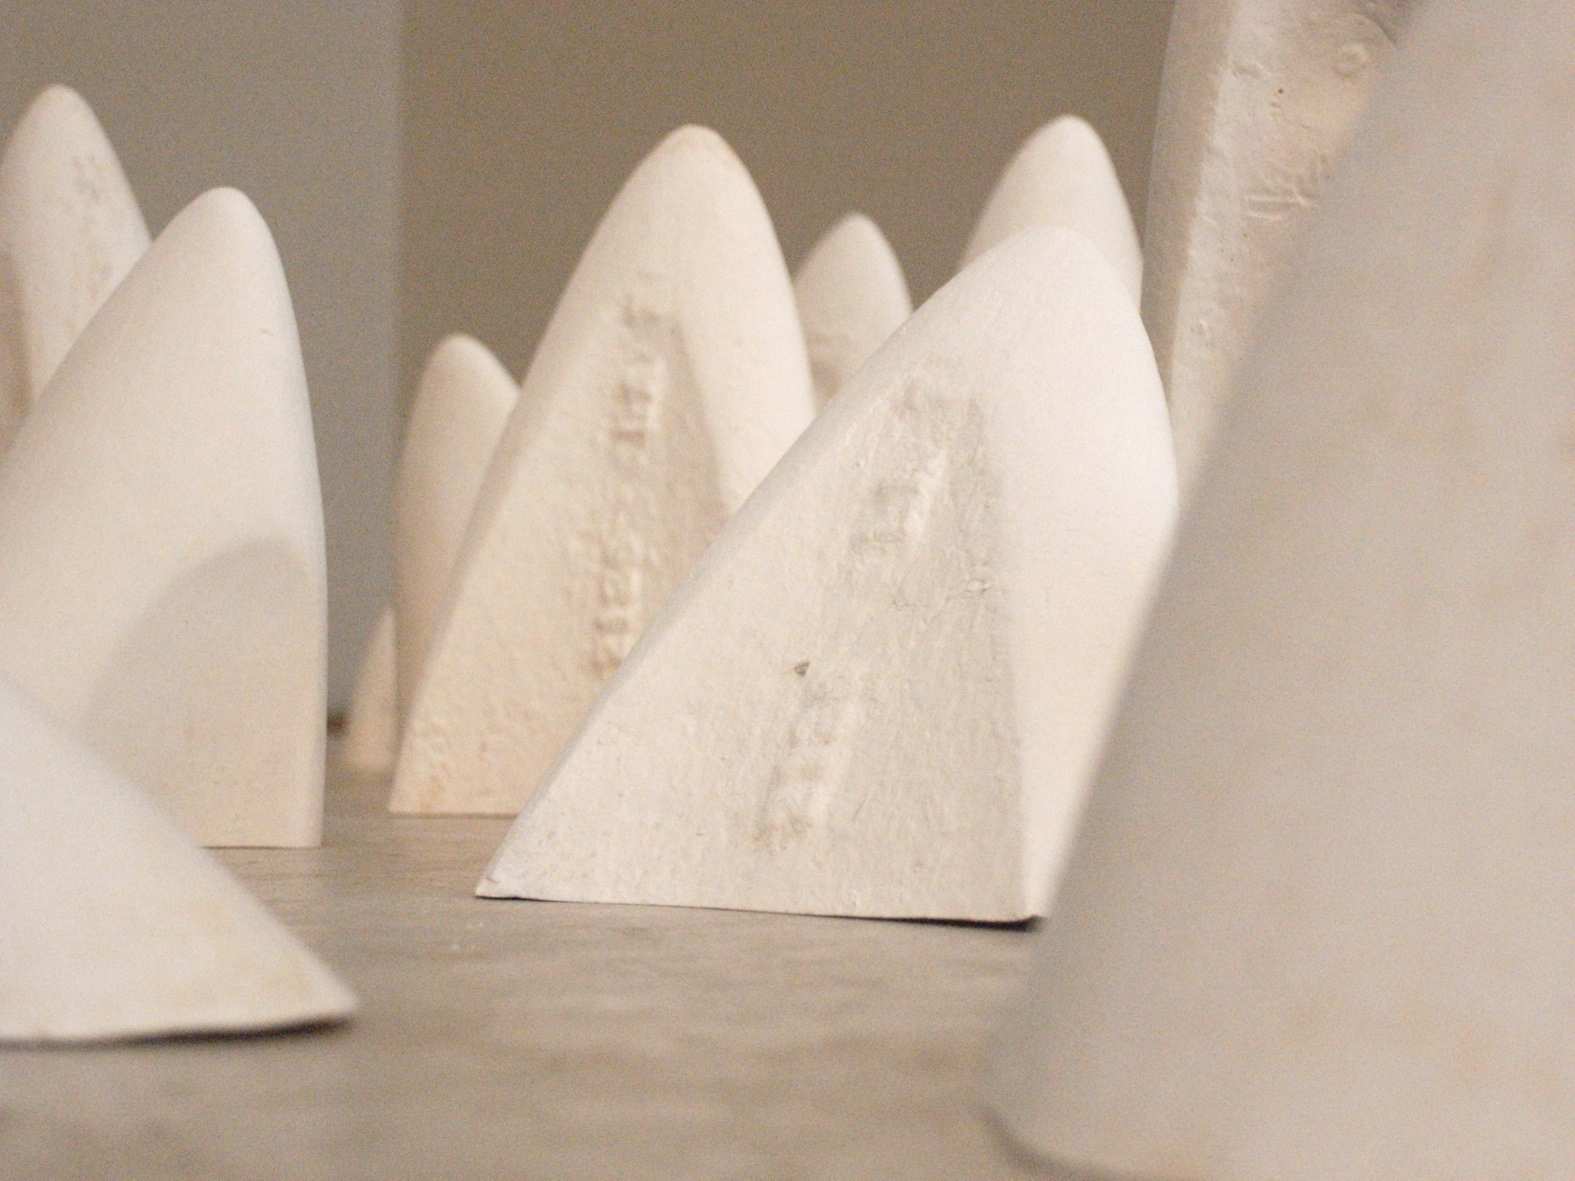 01 Plough Points, 2009, plaster, overall size 19 x 120 x 120 cm (detail) Photo Harmit Kambo